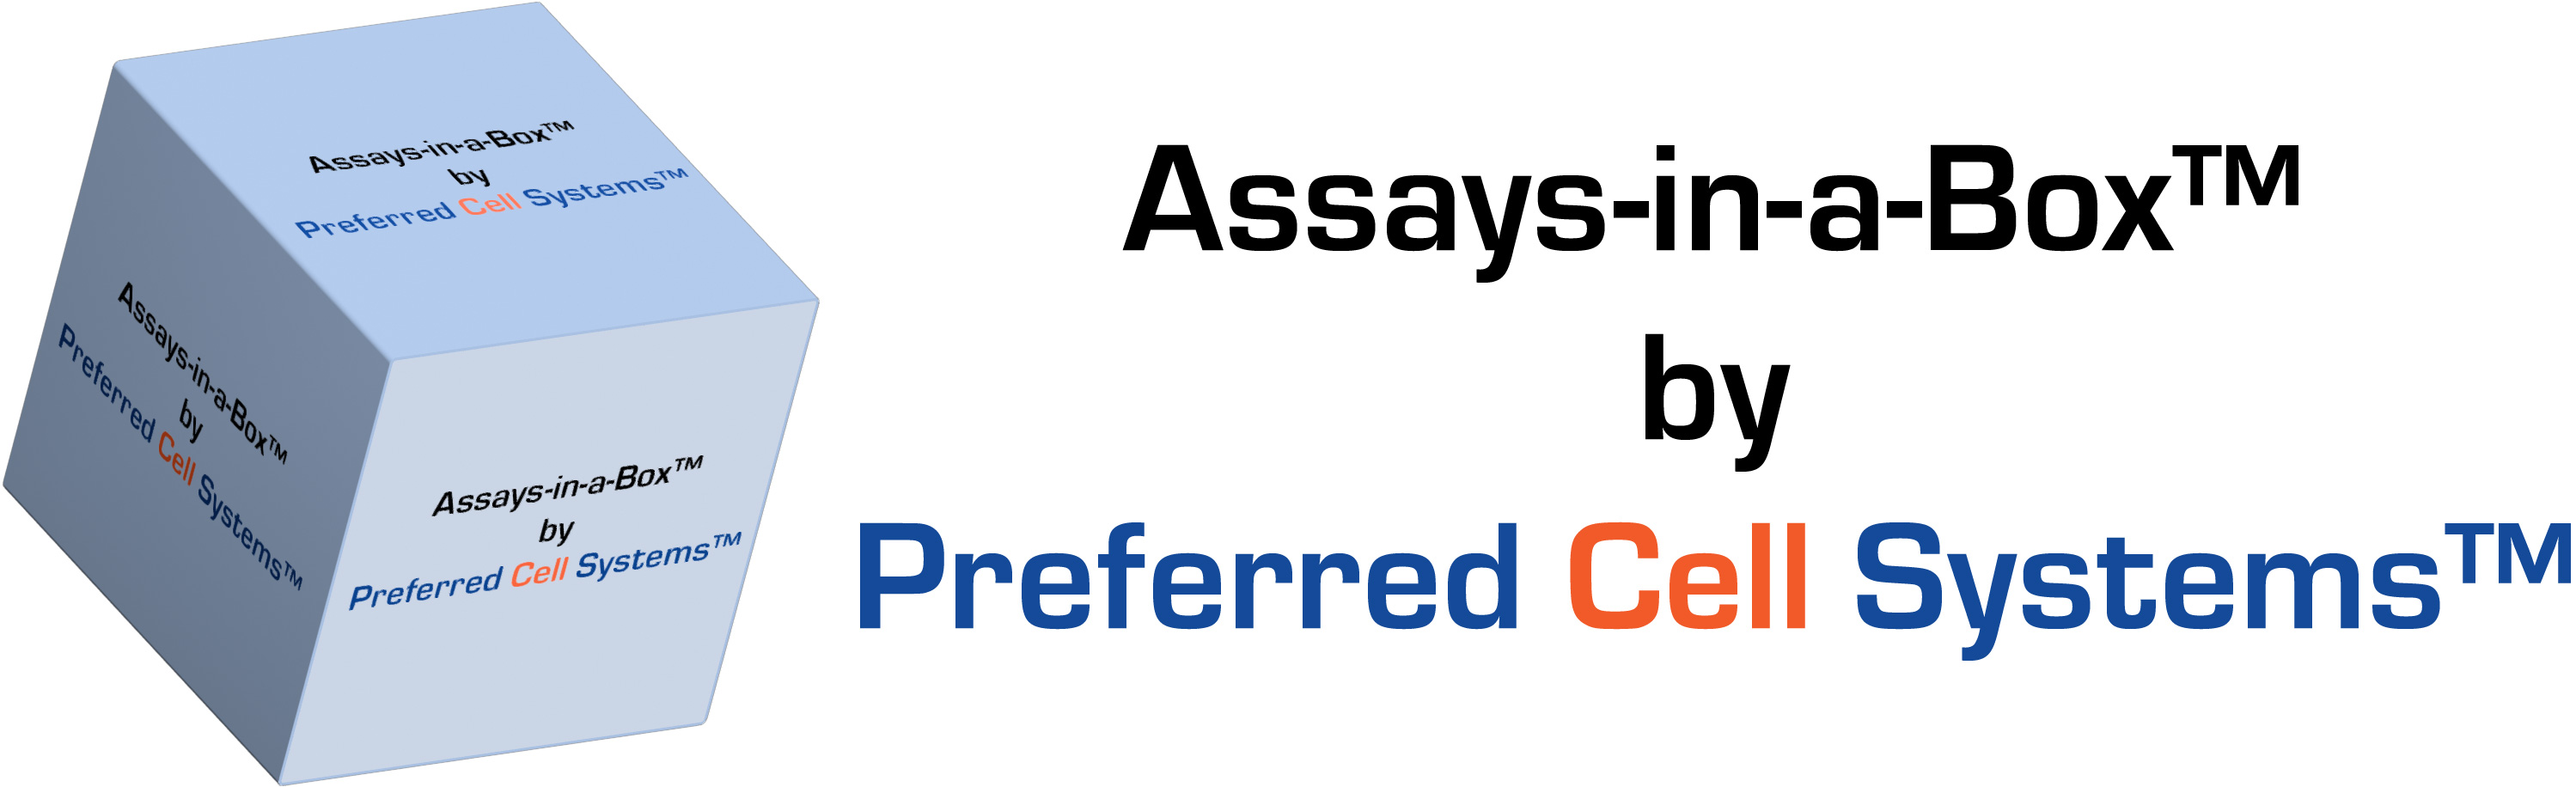 Assays-in-a-Box™ by Preferred Cell Systems™